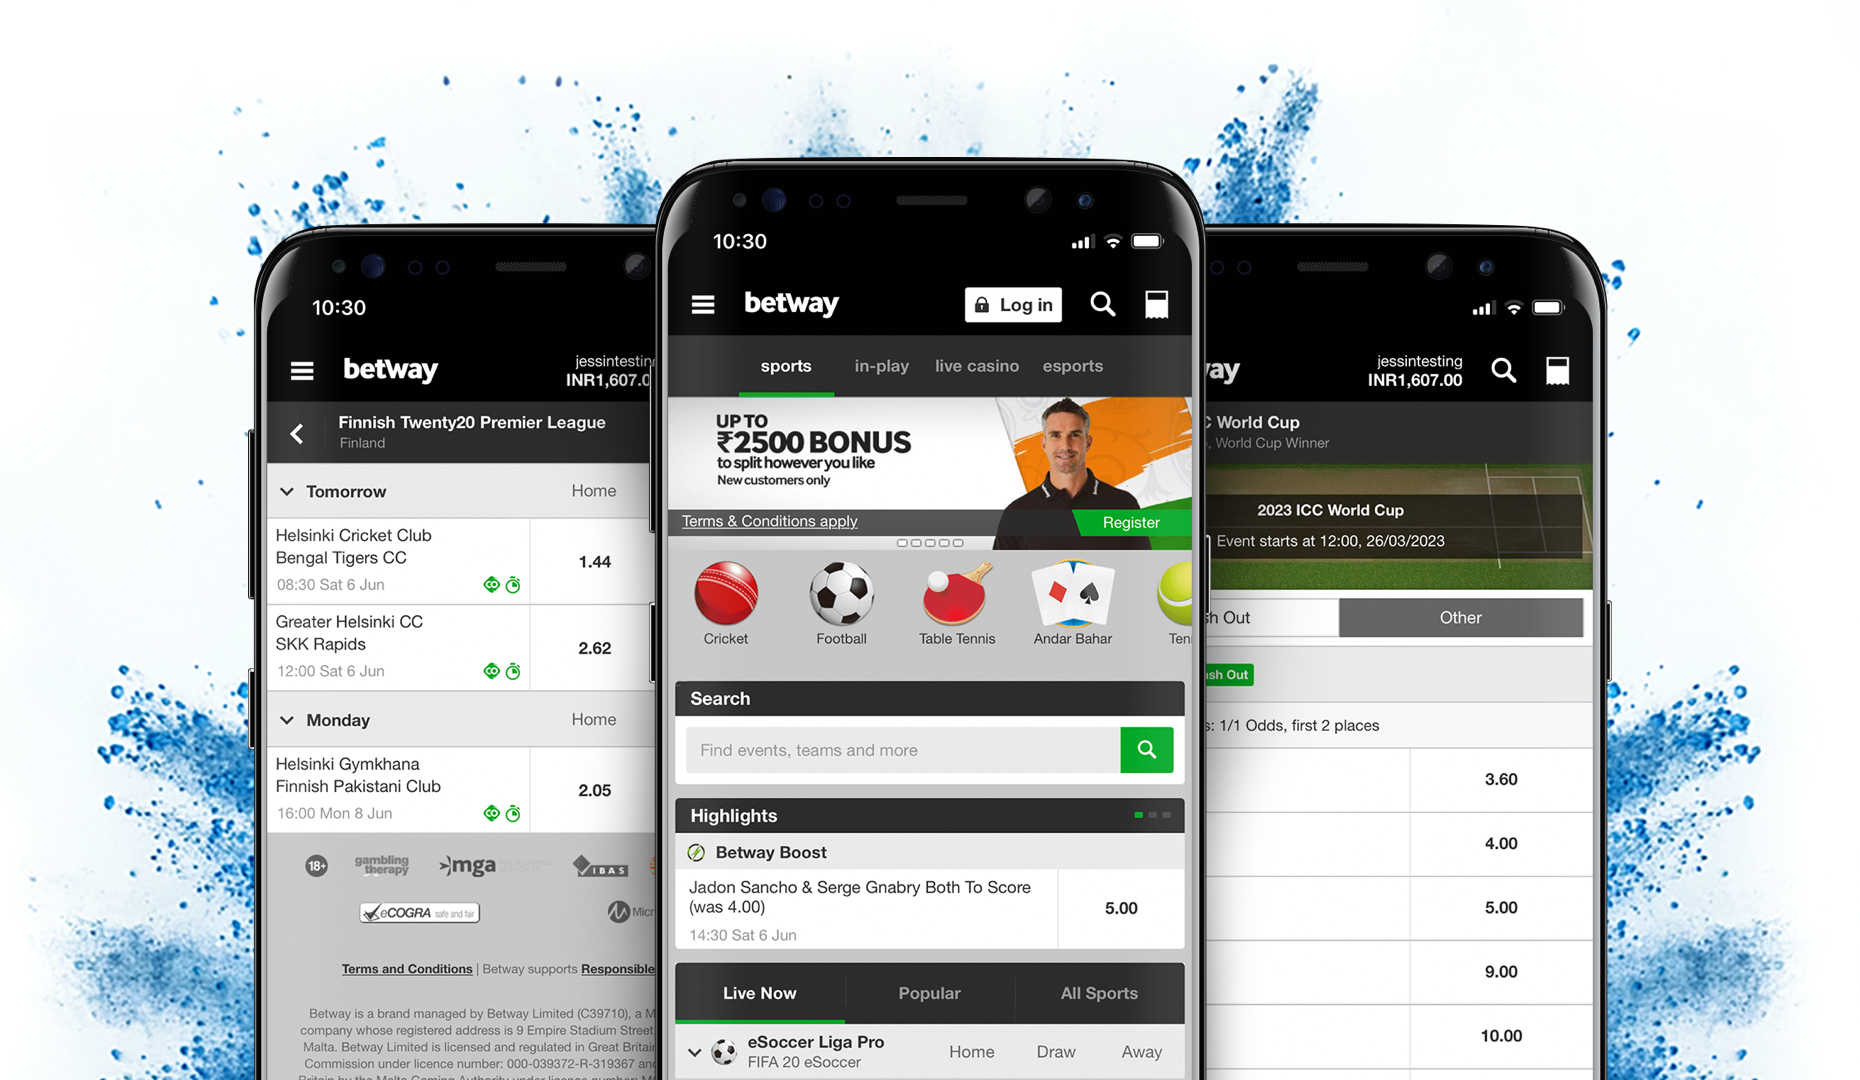 With the Betway App you can access all of your favourite sports, wherever you are, whenever you want.